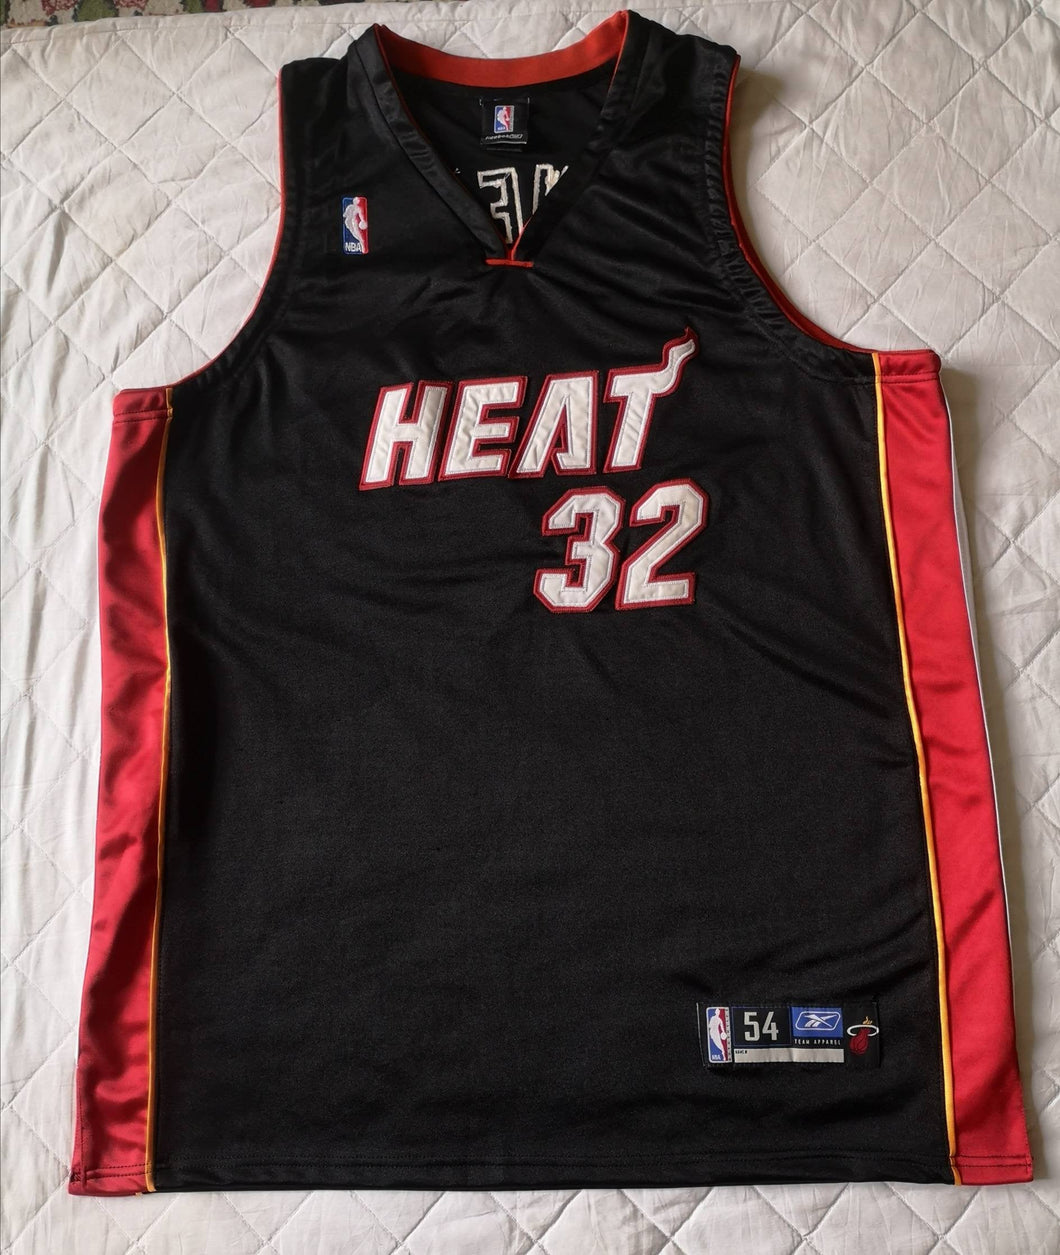 Authentic jersey Shaquille O'Neal Miami Heat 2005-06 Reebok Player Version size 54 NBA